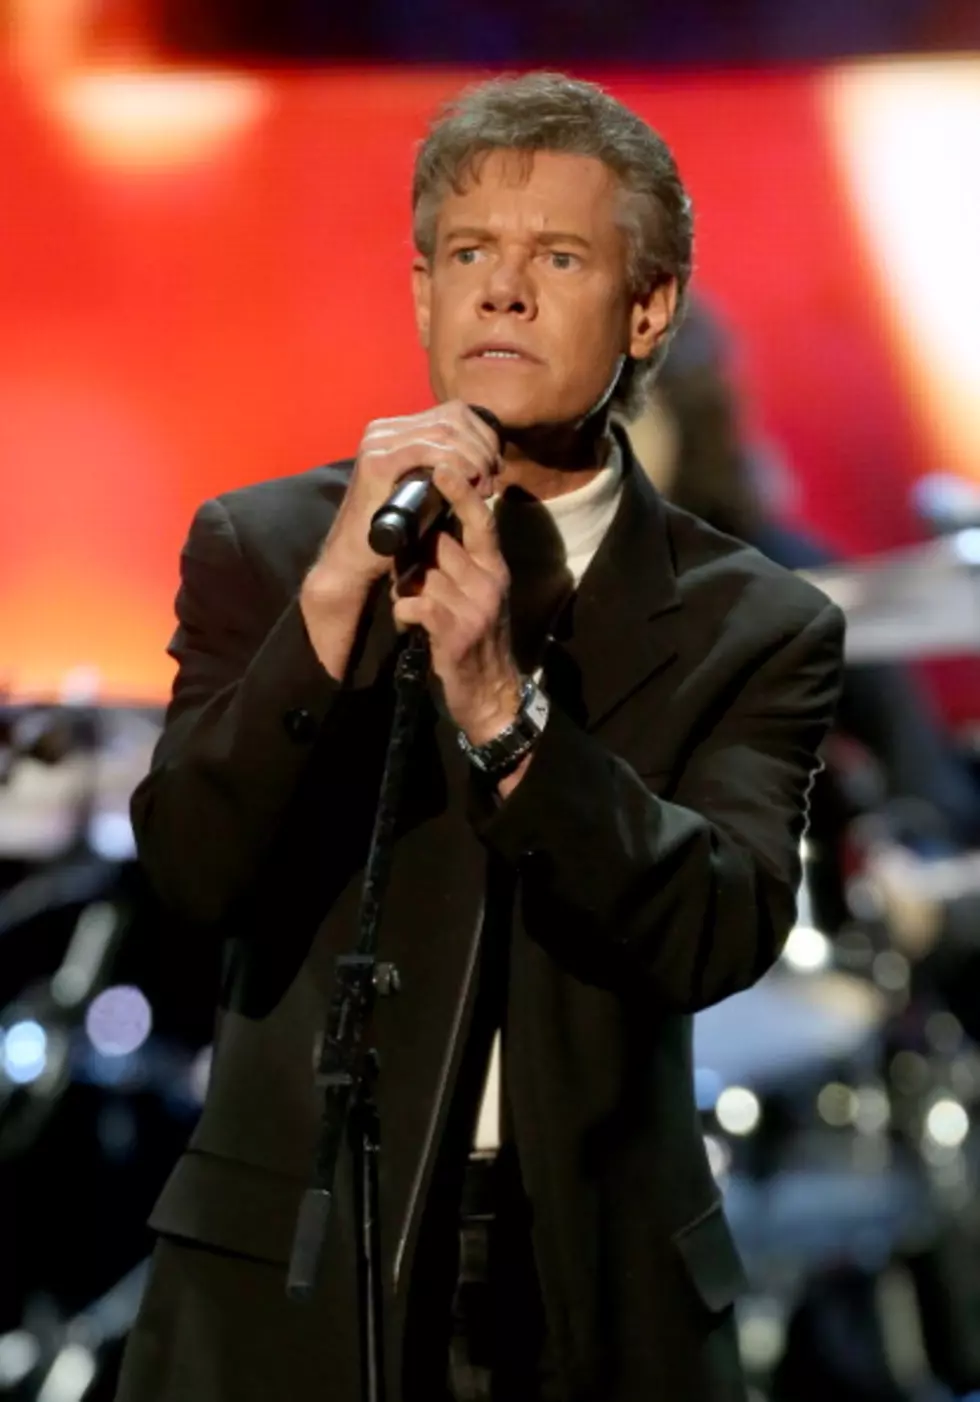 Randy Travis Receives Two Years Probation For Naked DWI Arrest